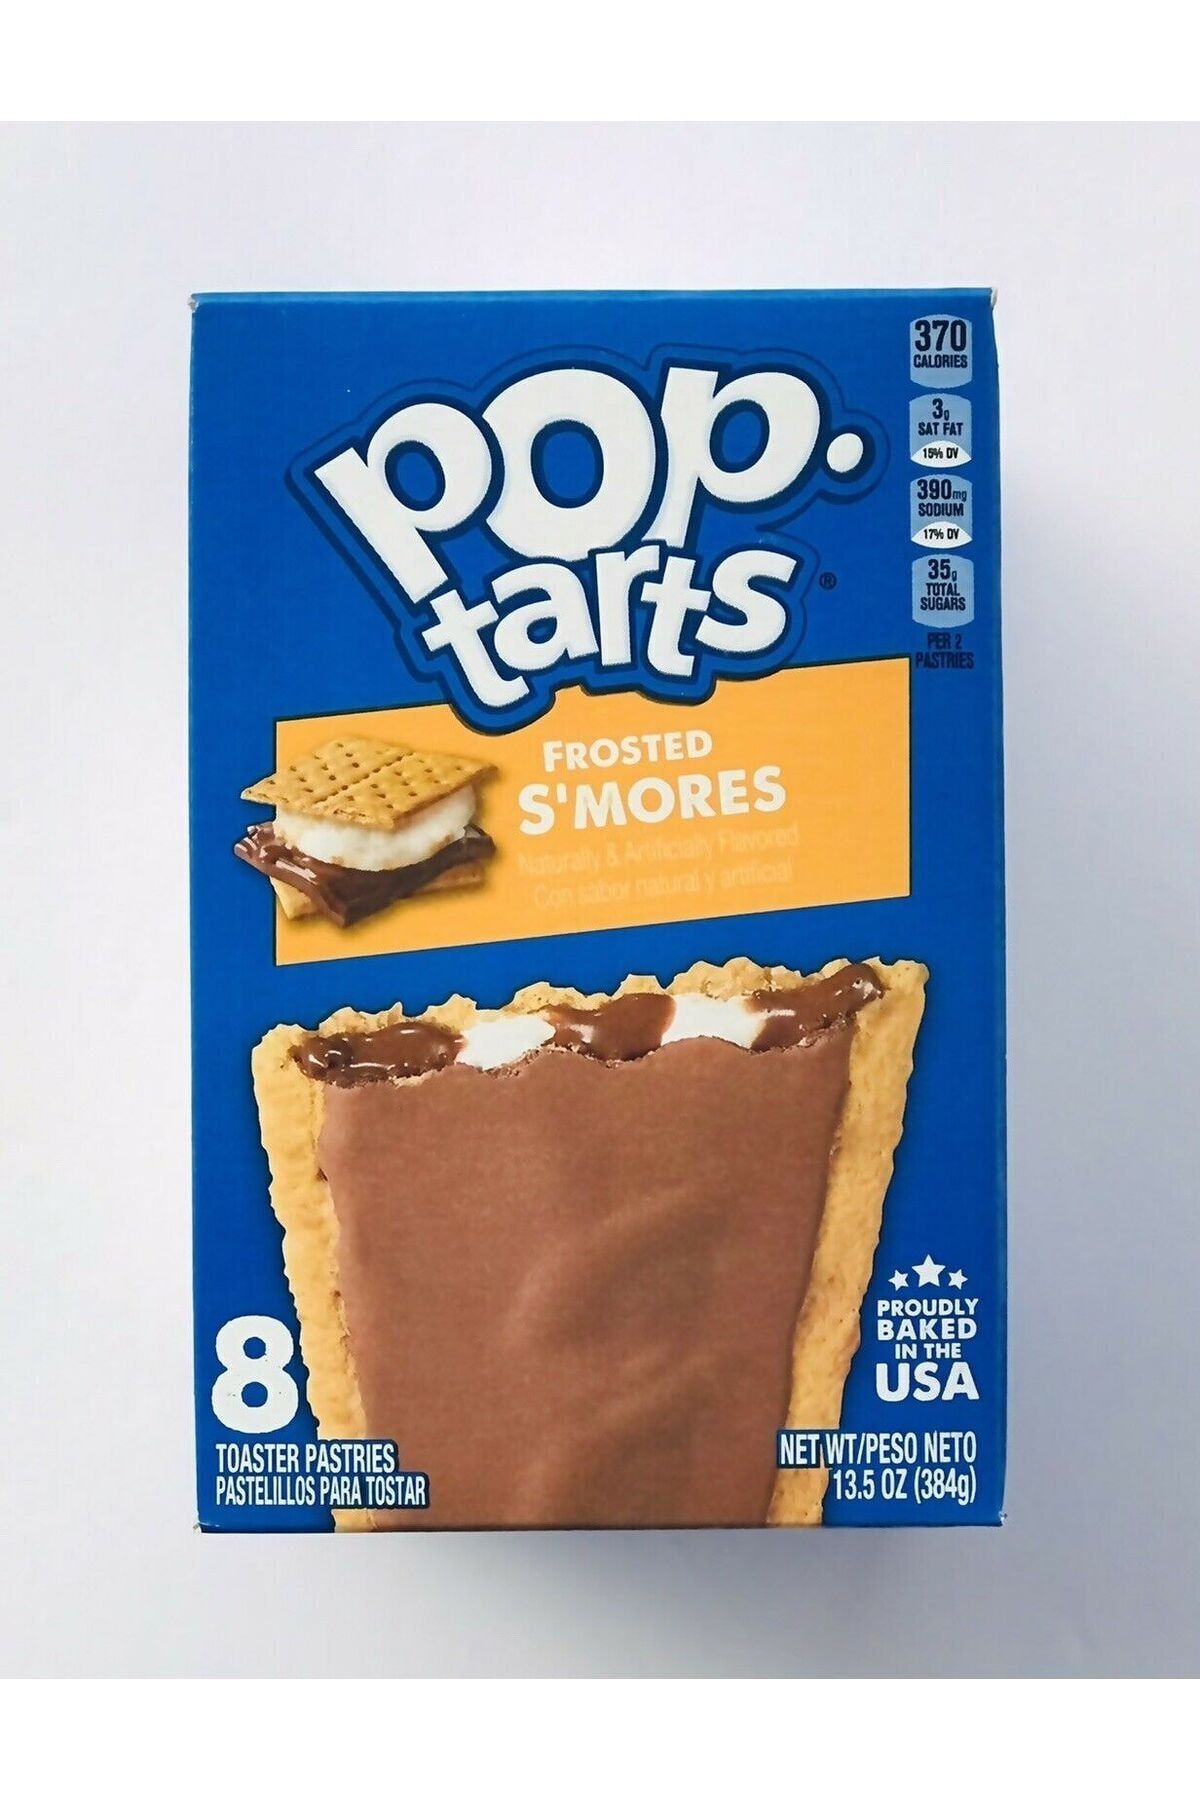 Kellogg's Pop Tarts Frosted S'mores 8 Adet 384 Gr.